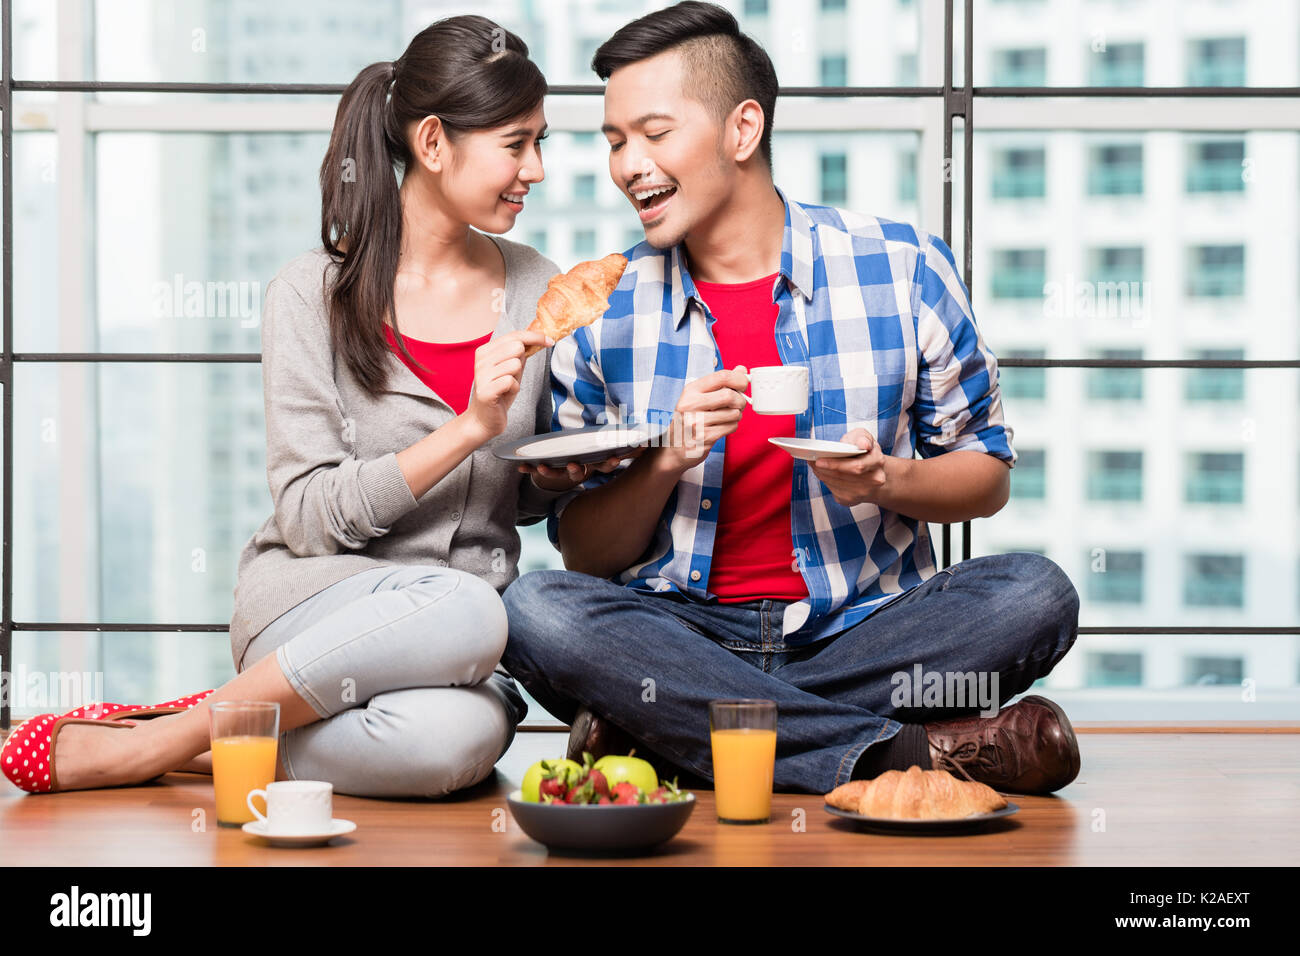 Young indonesian couple having breakfast Banque D'Images